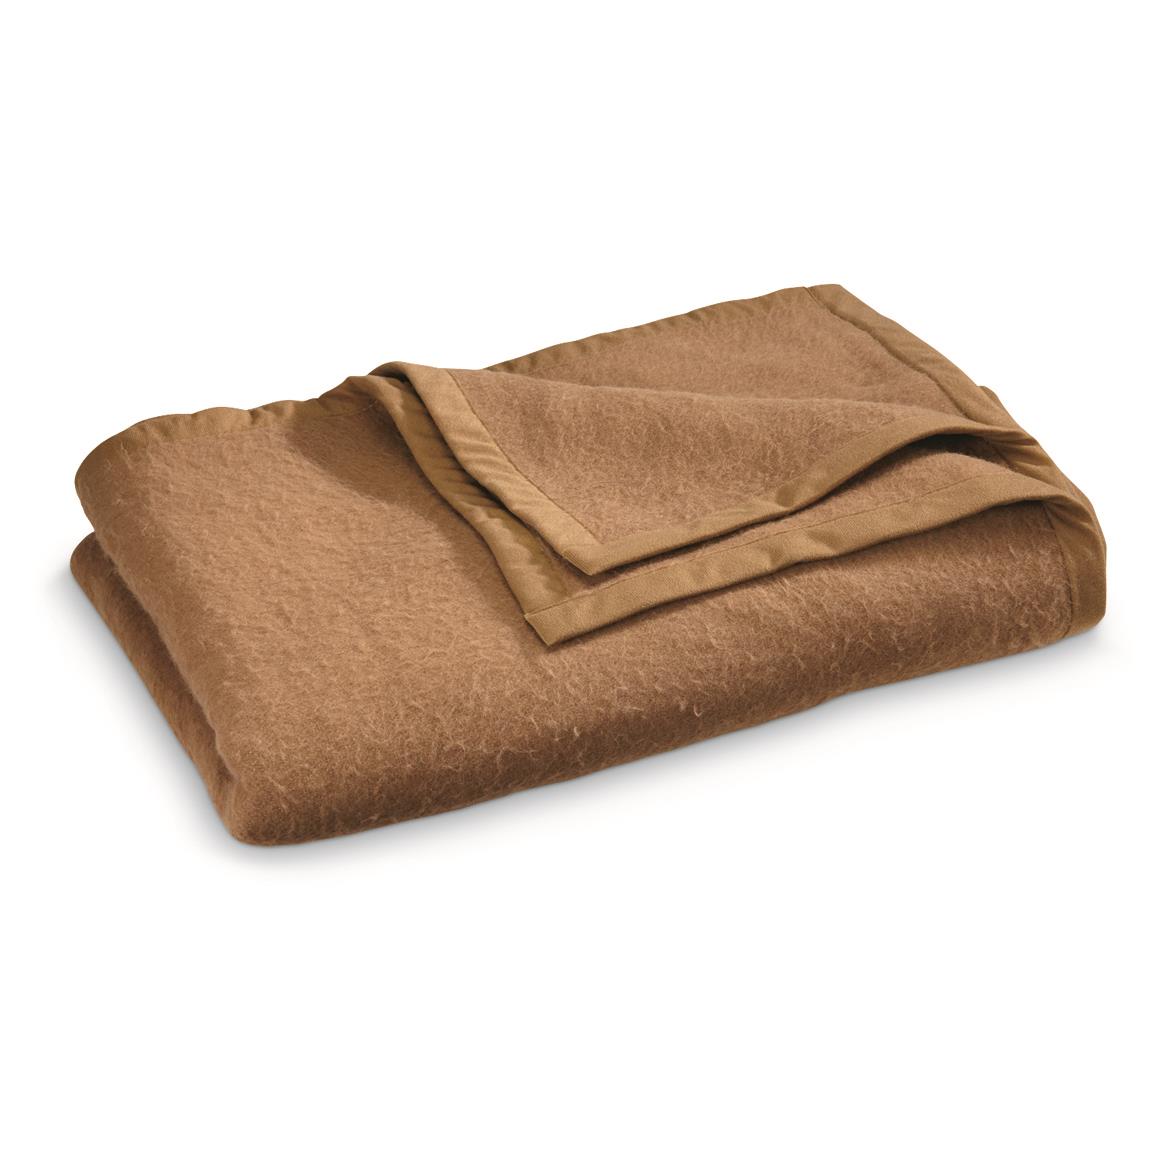 Swiss Army Style Wool Blanket, Reproduction - 232159, Army